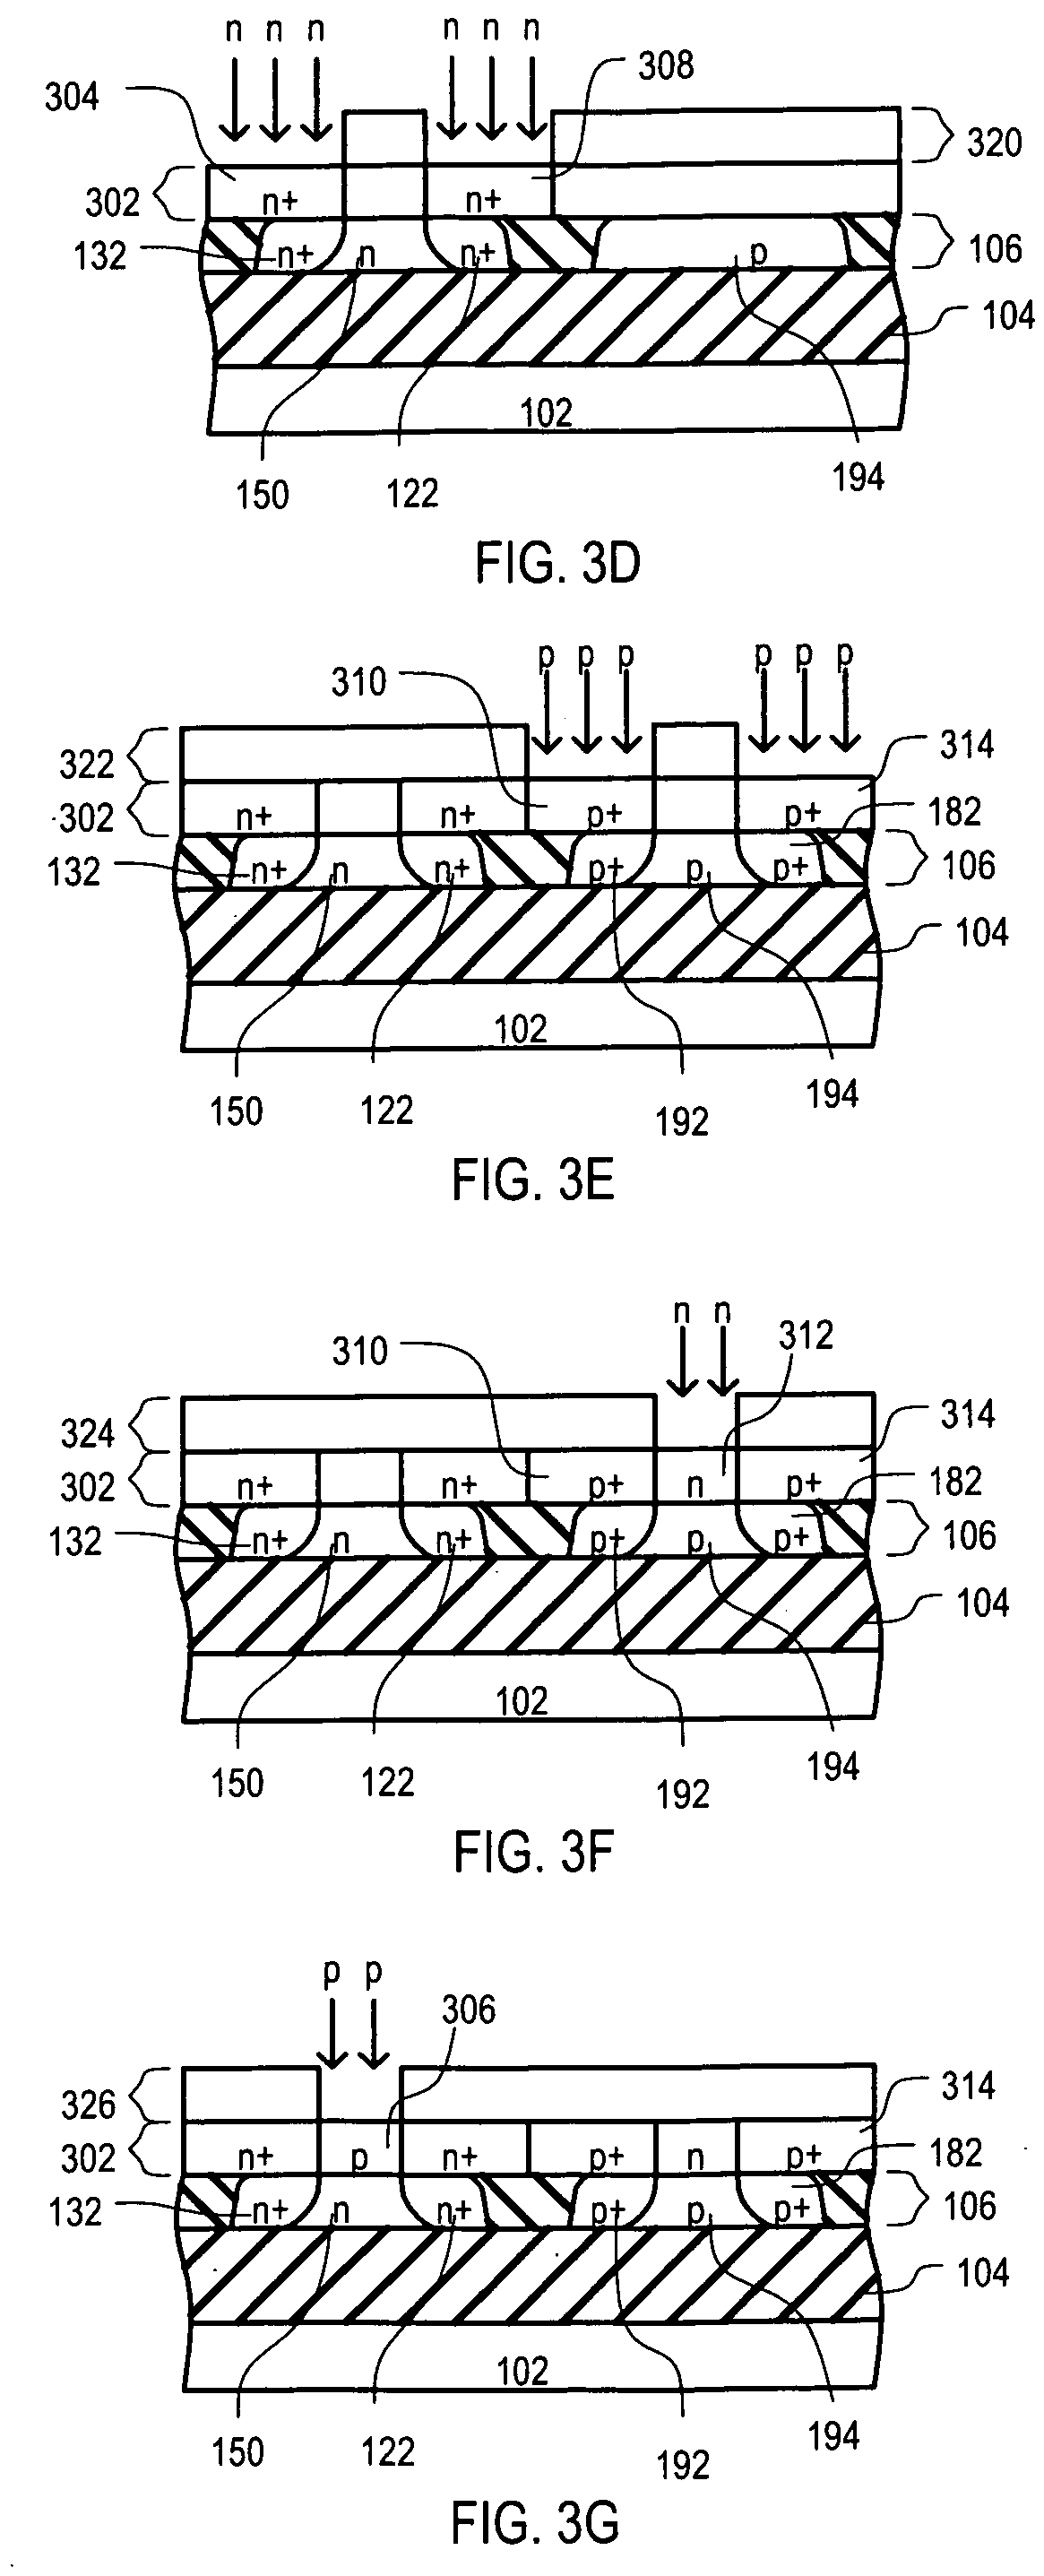 Silicon-on-insulator (SOI) junction field effect transistor and method of manufacture